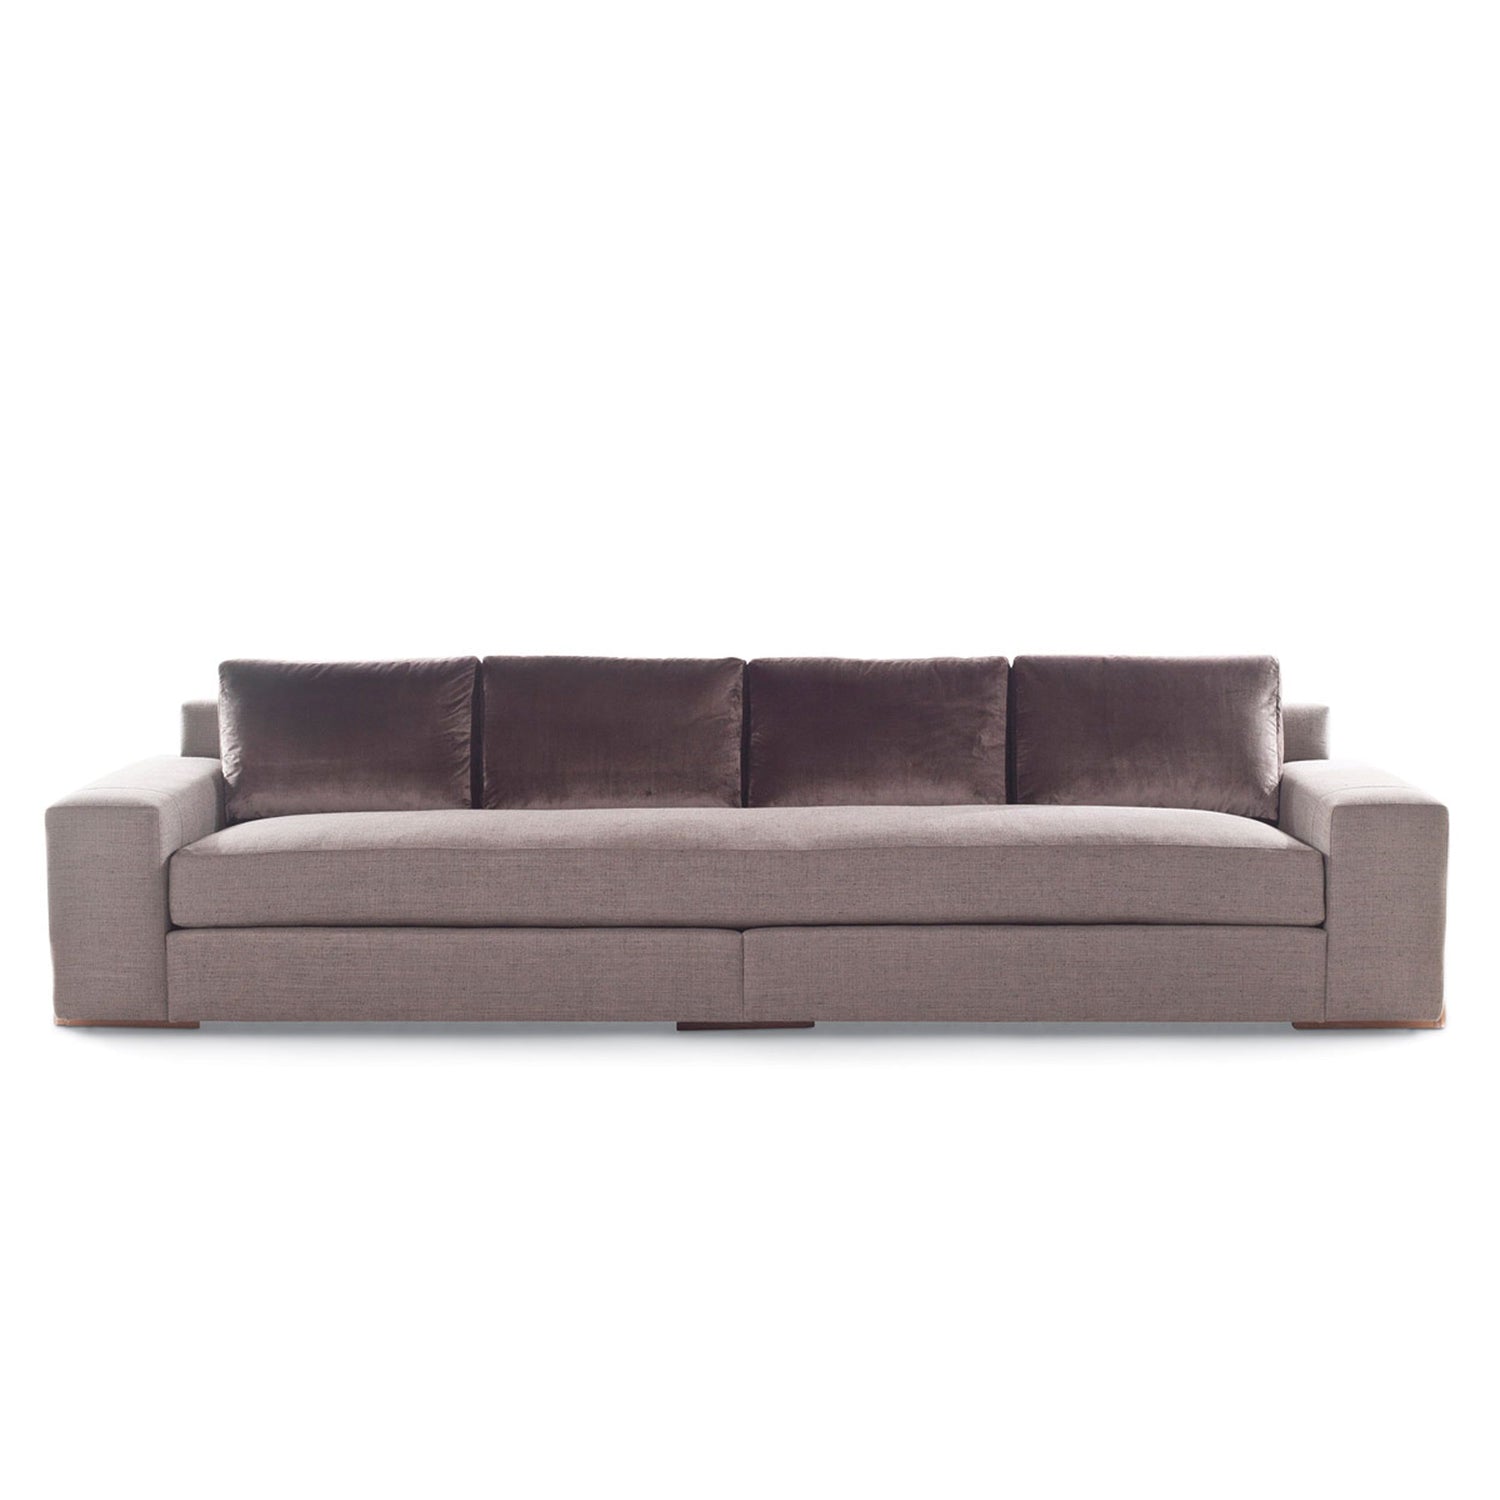 Egan Sofa with Tapered Legs